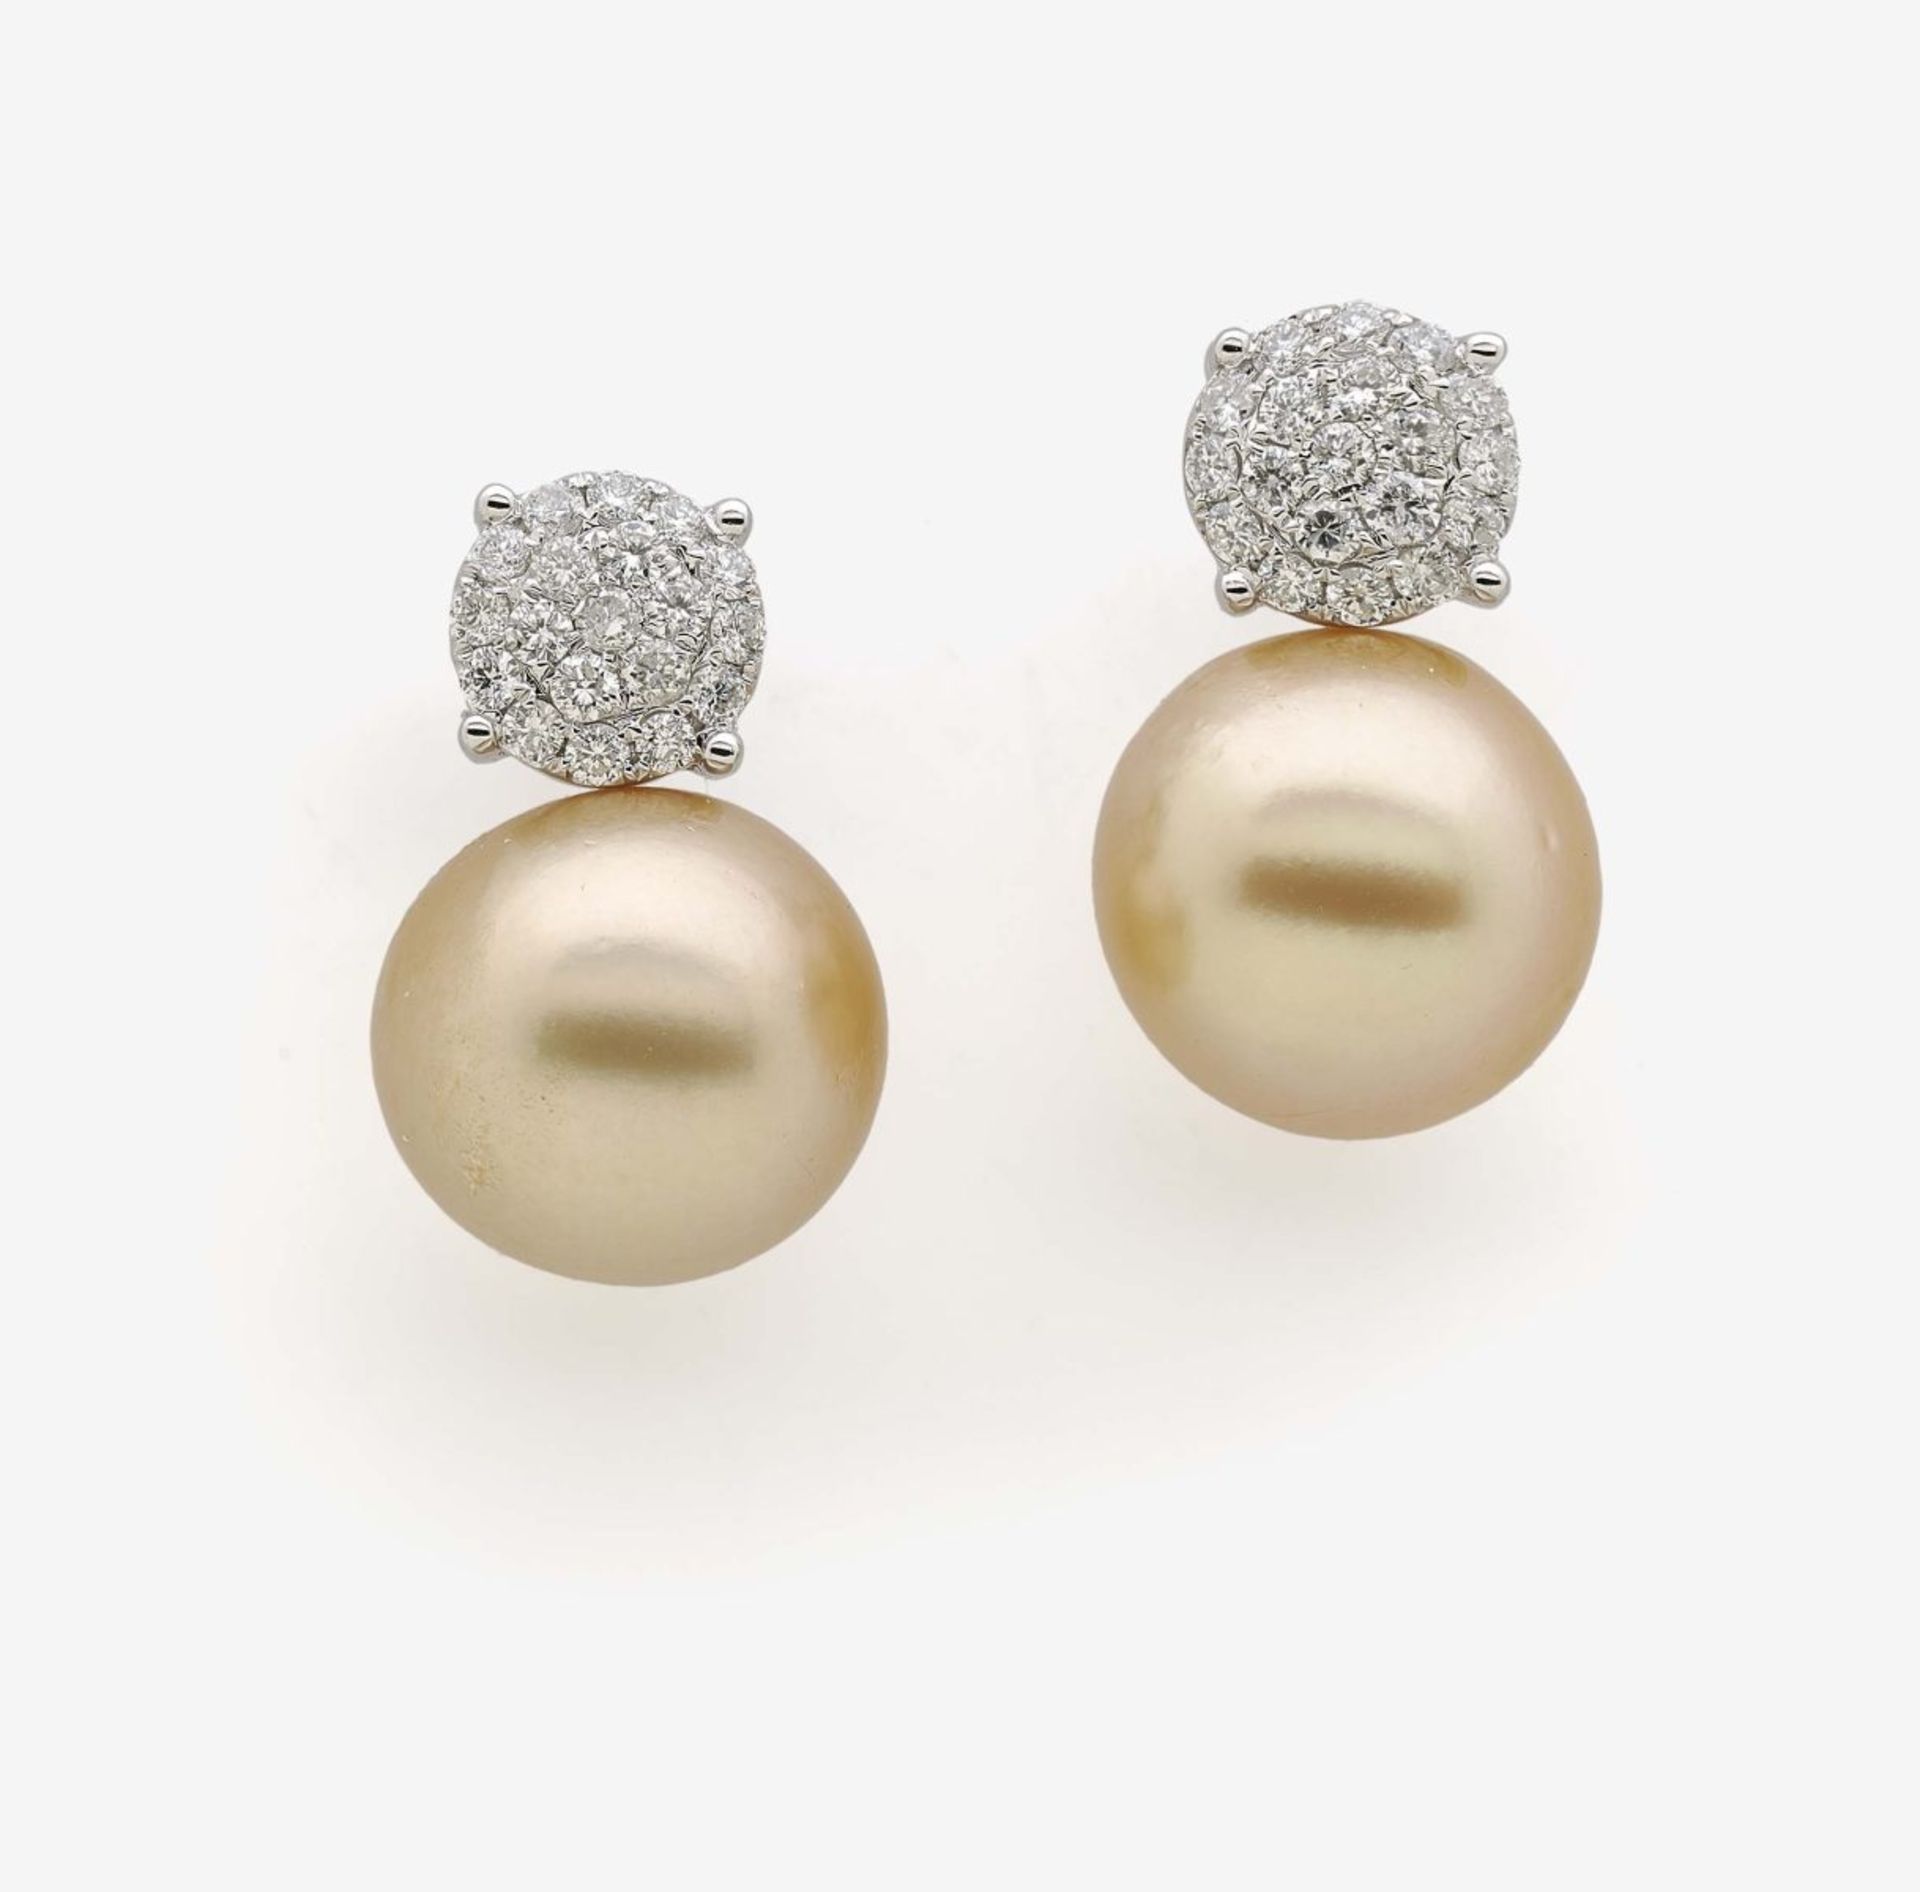 A Pair of South-Sea Cultured Pearl and Diamond Ear Studs18K white gold (750/-), stamped. 38 small,